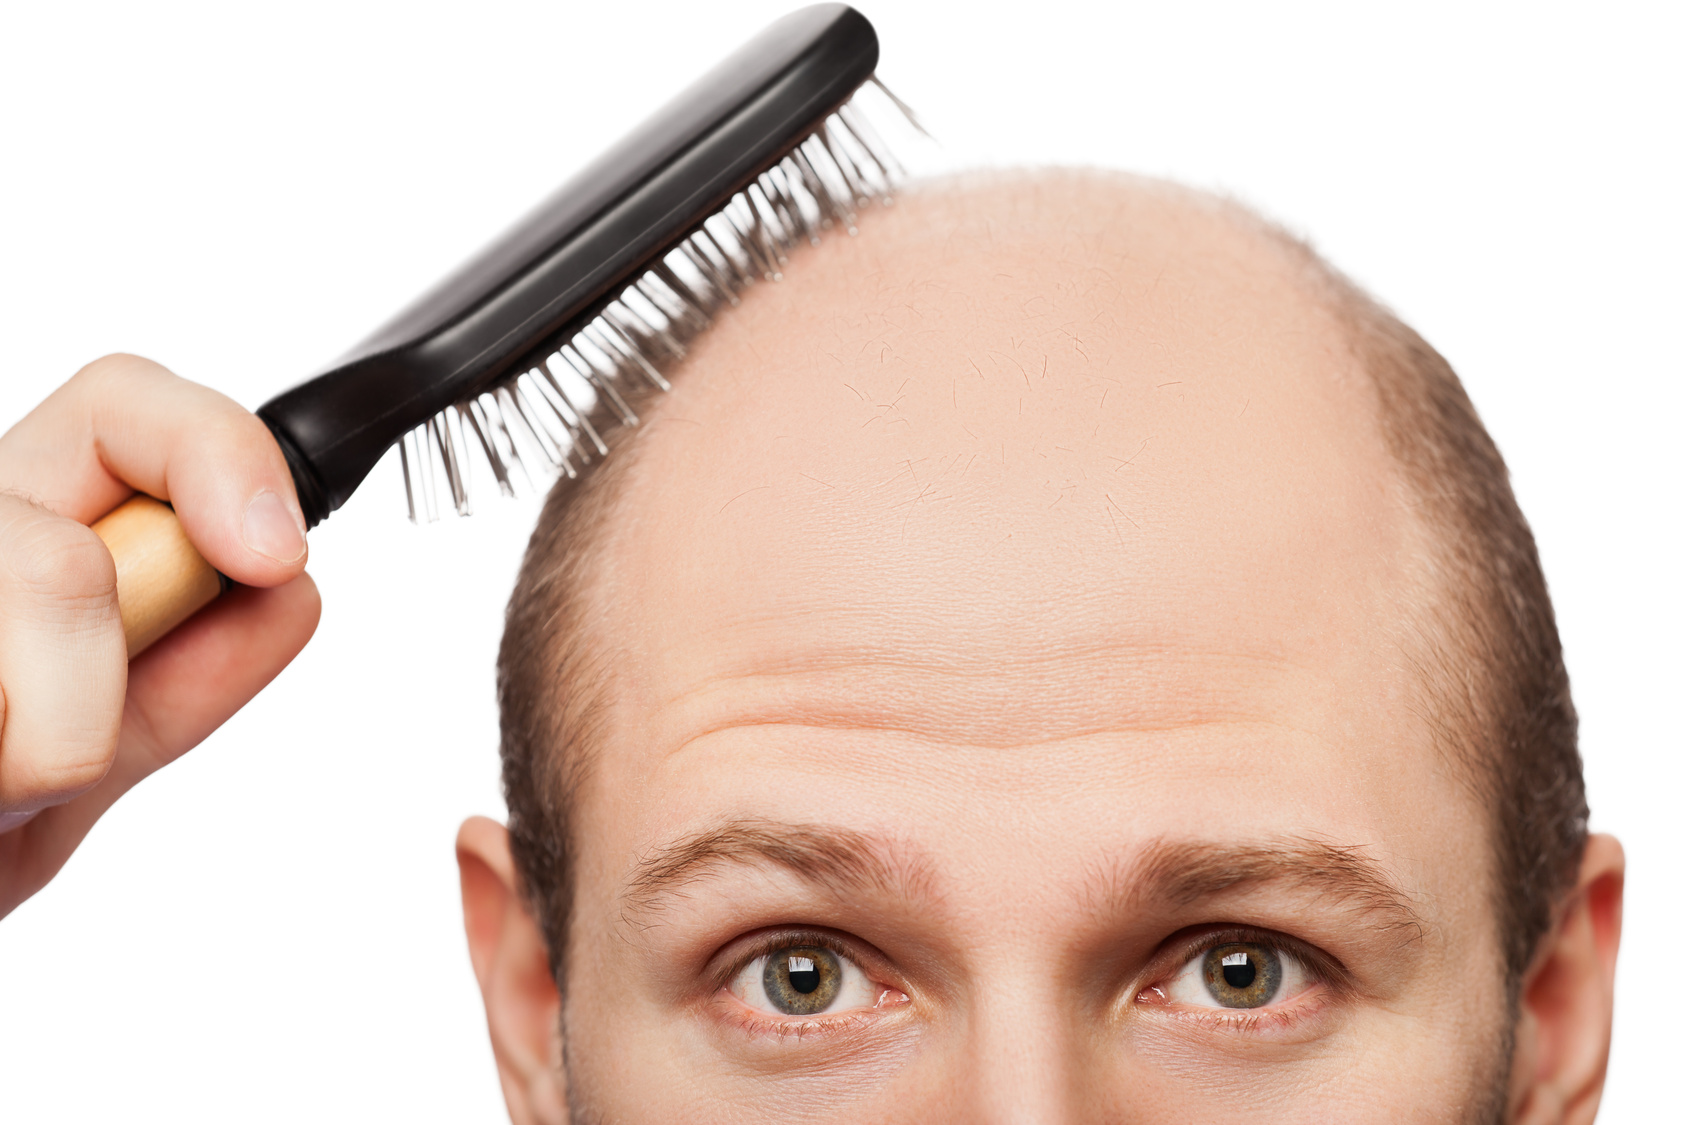 Human alopecia or hair loss - adult man hand holding comb on bald head